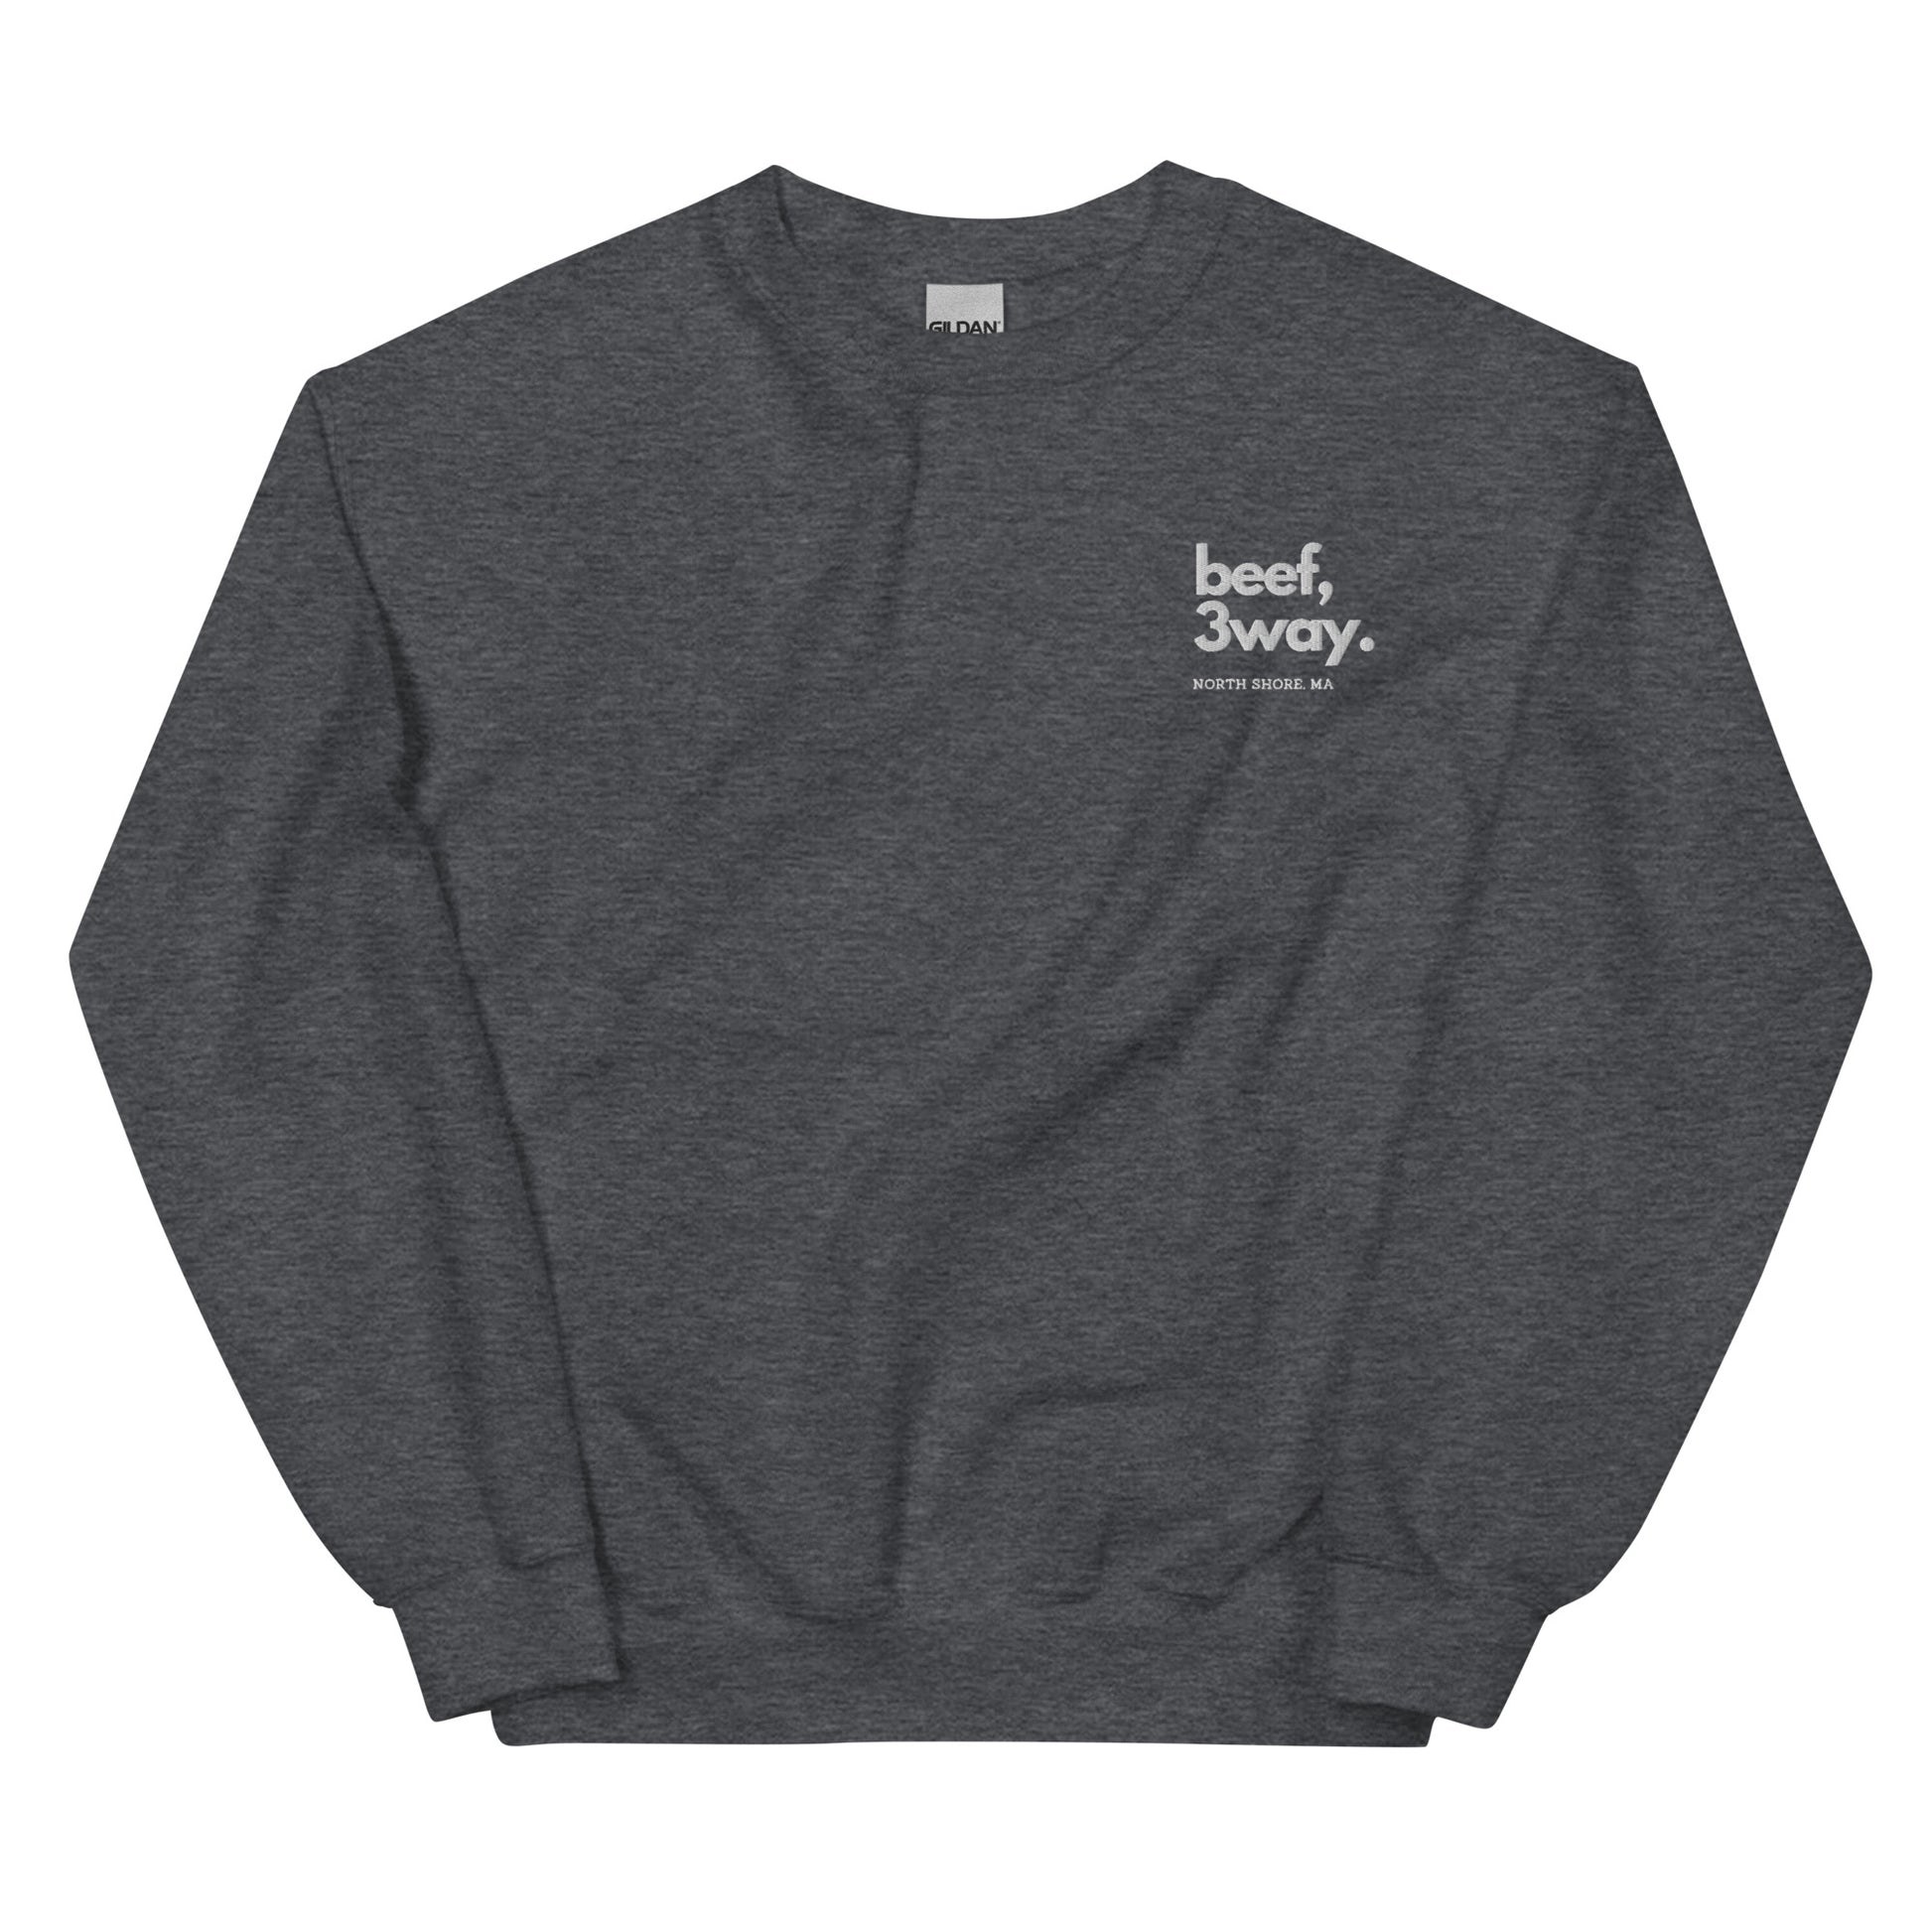 heather grey crewneck that says "beef, 3way north shore ma" in white lettering